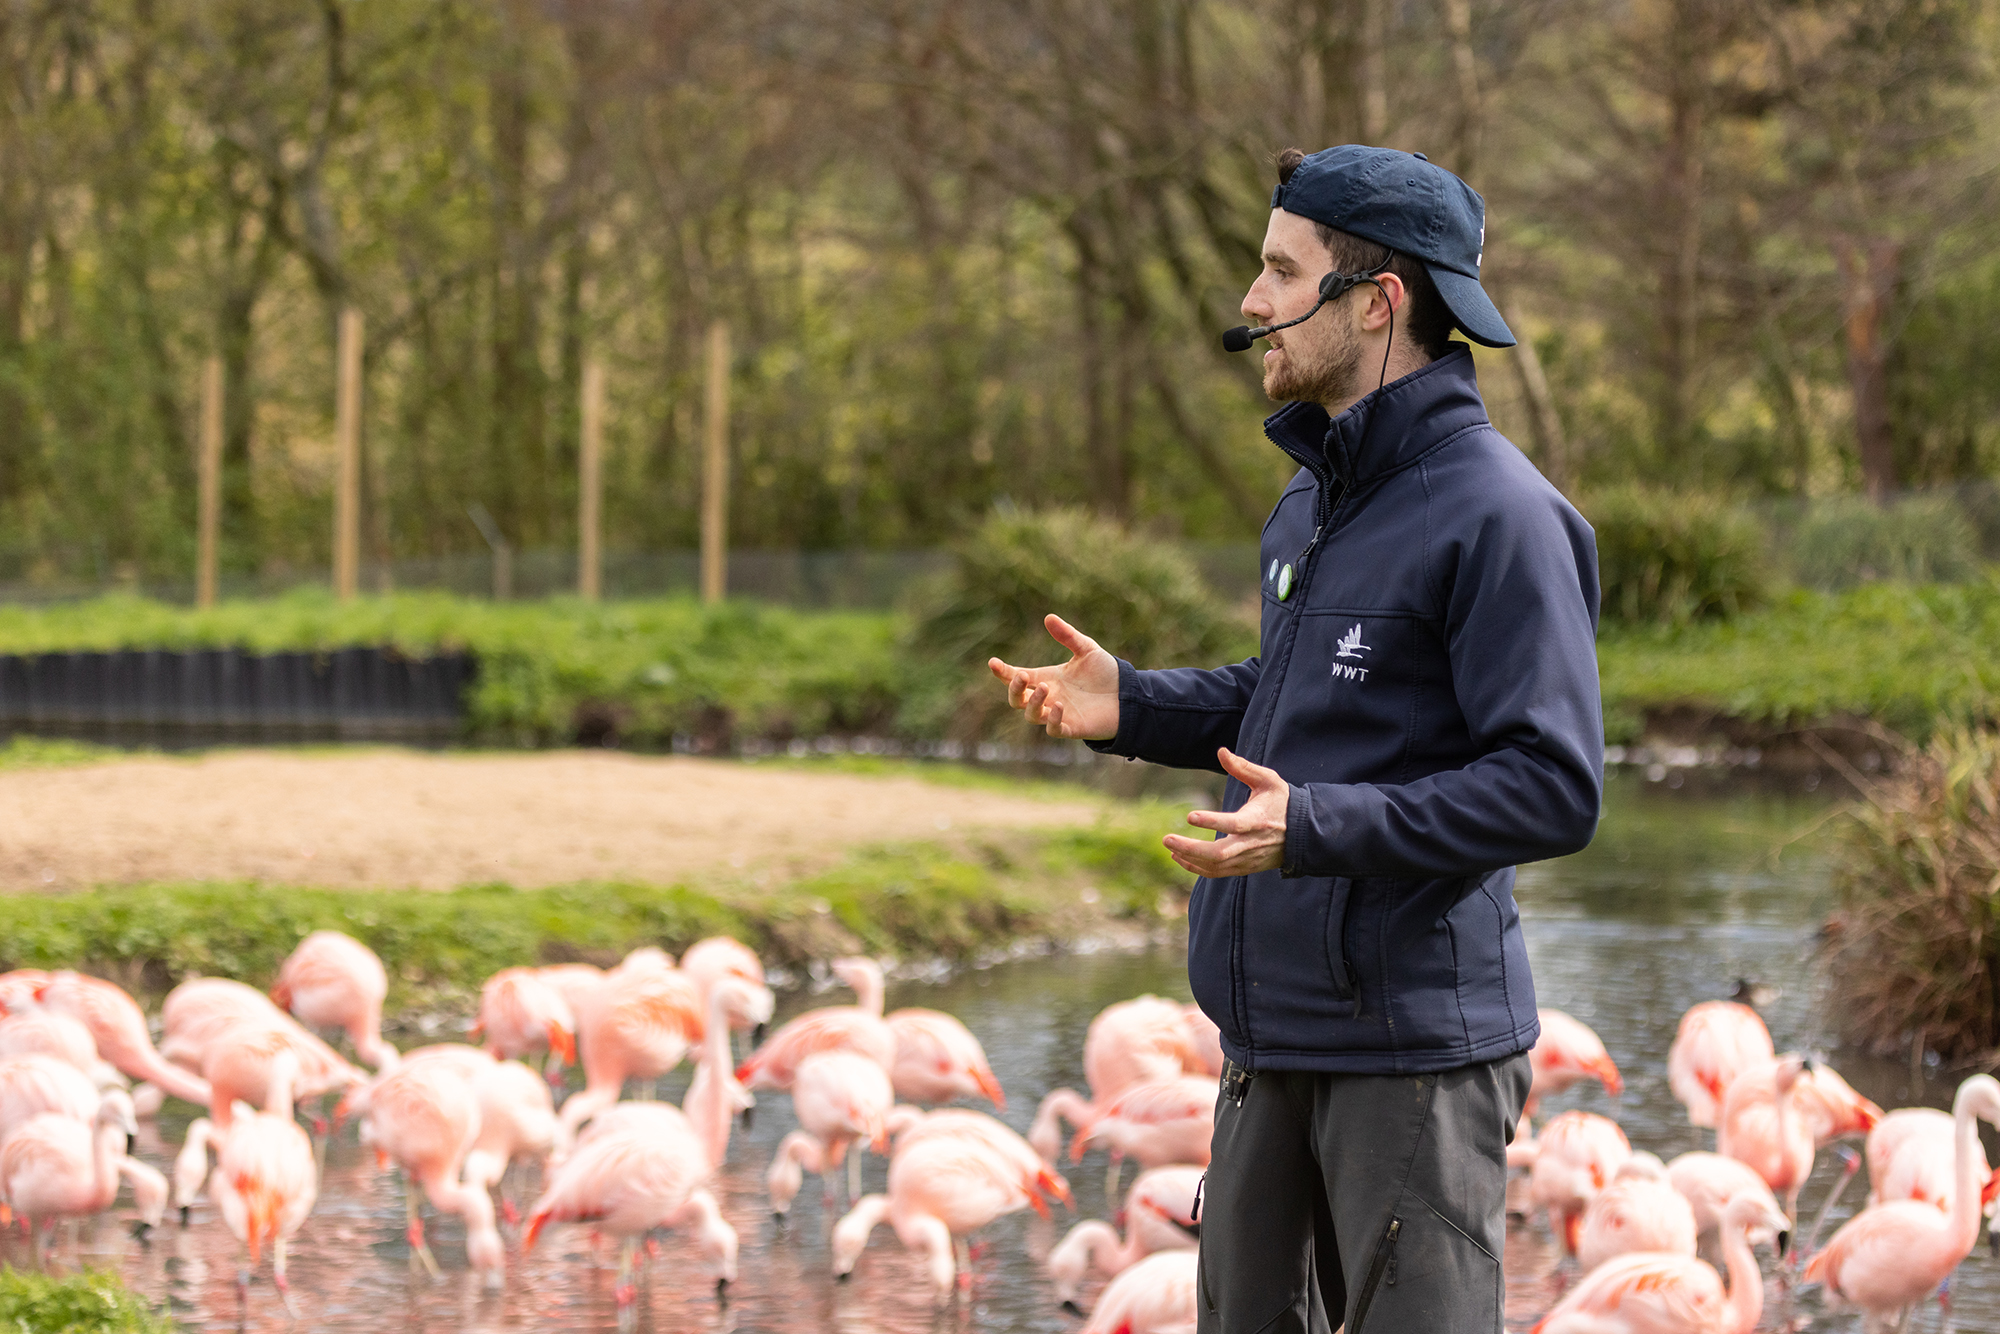 WWT Warden presenting with a microphone in front of Chilean flamingos